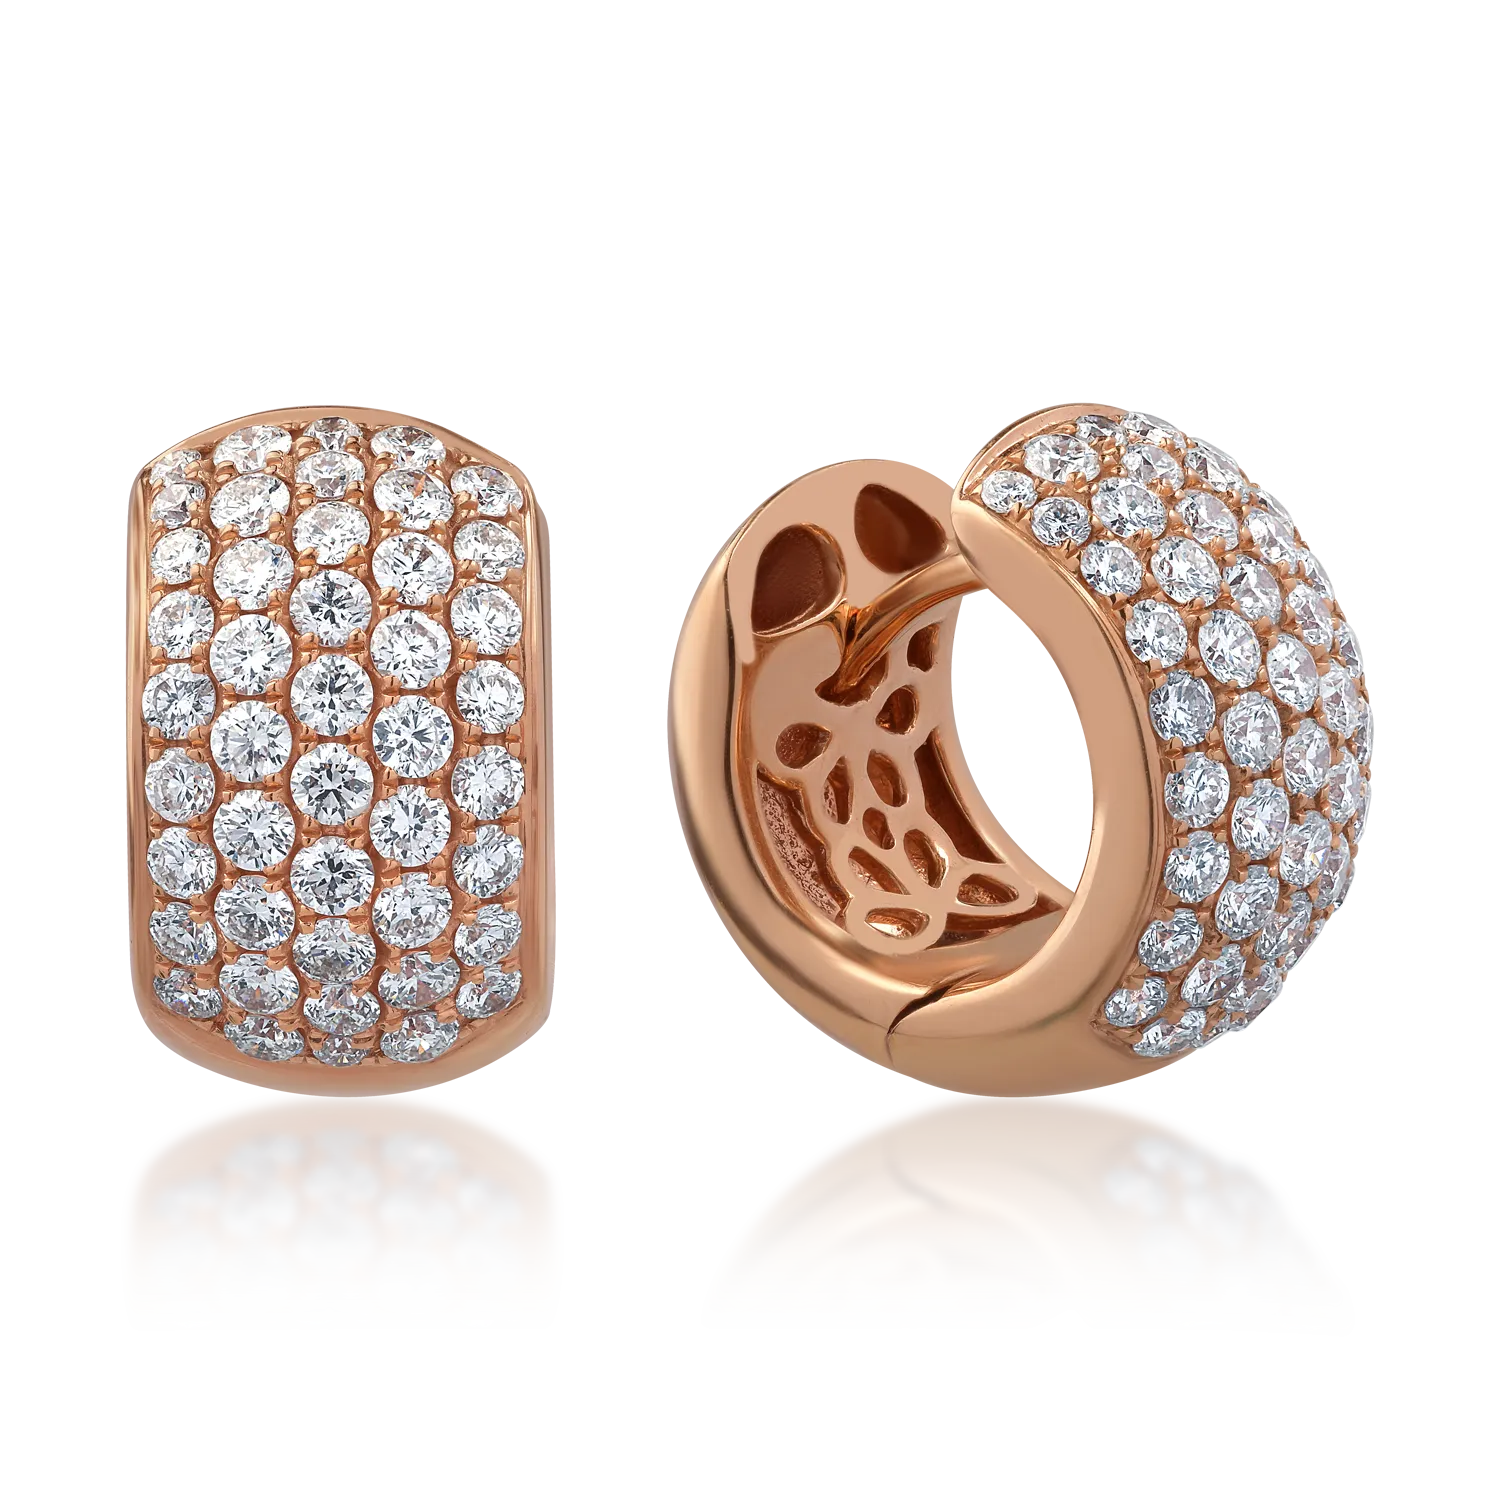 18K rose gold earrings with 0.92ct diamonds